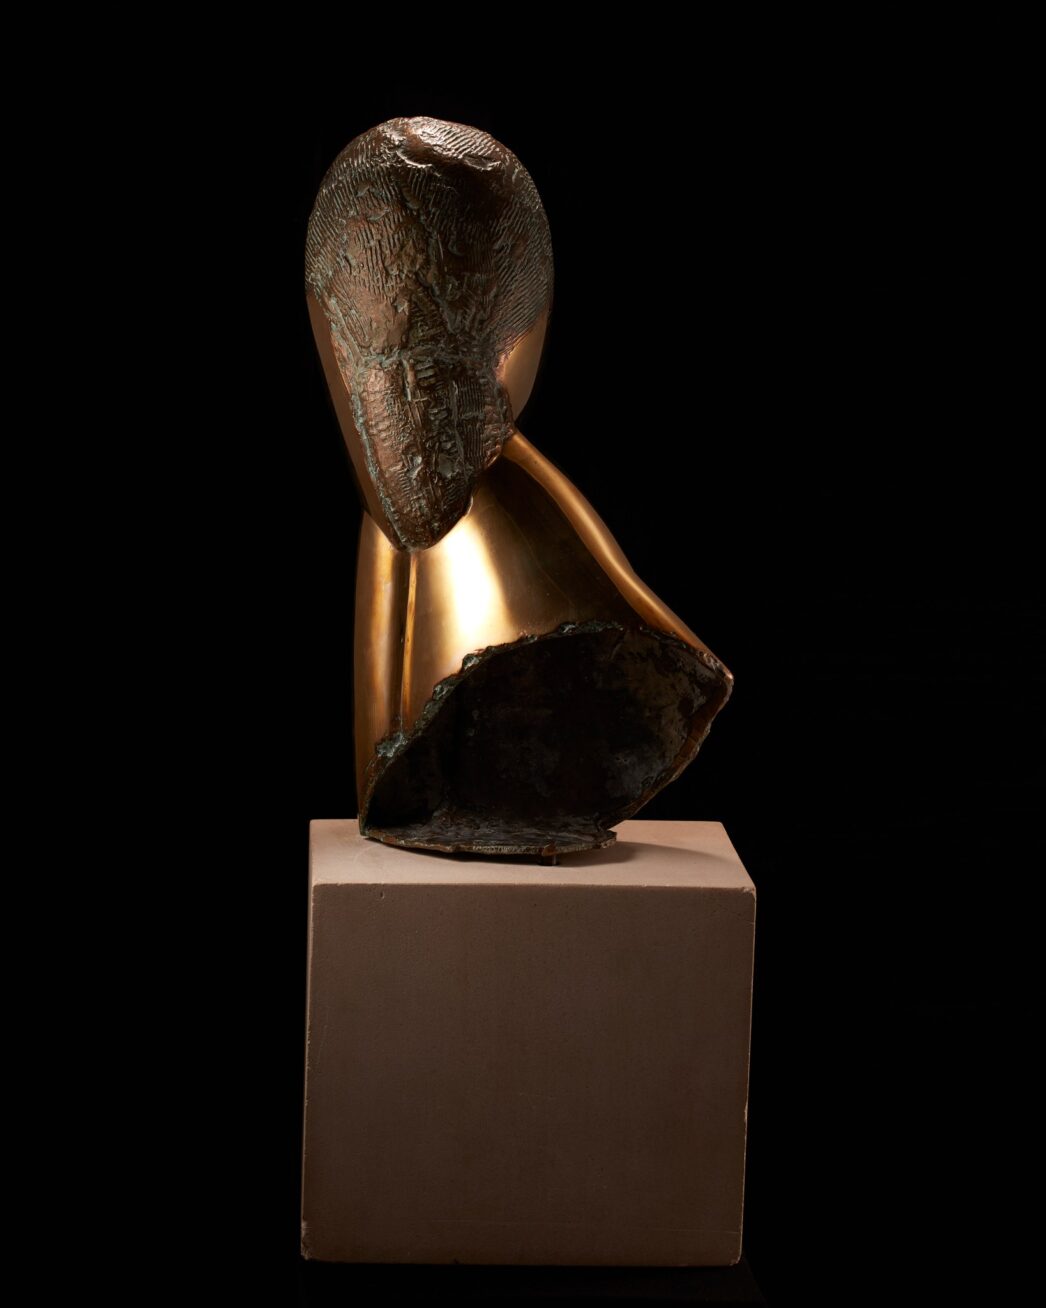 Image description: Muse, Constantin Brancusi, bronze on limestone base, 19 1/2 x 10 x 5 inches. A smooth, bronze, stylized bust of a woman’s head, elongated neck and shoulder. Front view: The woman’s egg-shaped head is smooth except for a raised V shape in the center representing the brow and finishing in a delicate nose. A small mouth is the only other feature on the face. Hair is suggested with rough, textured lines incised into the crown of the head. This texture appears darker than the glossy golden bronze face. A long neck extends from the head at left and is attached to a sloping shoulder. At right, the head seems to rest on a hand and forearm that extends to join the shoulder. The bottom edge of the sculpture has a rough and unfinished appearance. The bust rests on a gray cube of limestone that is juts a bit wider than the sculpture and about half as high. Left profile view: A smooth egg-shaped head smooth except for a small nose at the lower third of the profile. An simple C shaped ear is positioned below the textured hair. A gracefully shaped neck extends forward from a wedge-shaped shoulder. The bronze material folds back on itself, exposing rough edges, to rest on the base. Rear view: The textured hair appears to lengthen past the shoulder area ending in a blunt point. The sculpture’s shoulders fan out into a cone like structure that opens at an angle to expose the unpolished bronze inside. Right profile view: The hand and forearm shapes are visible from this view represented by simple elongated oval shape, a crease at the wrist giving definition to the two parts.